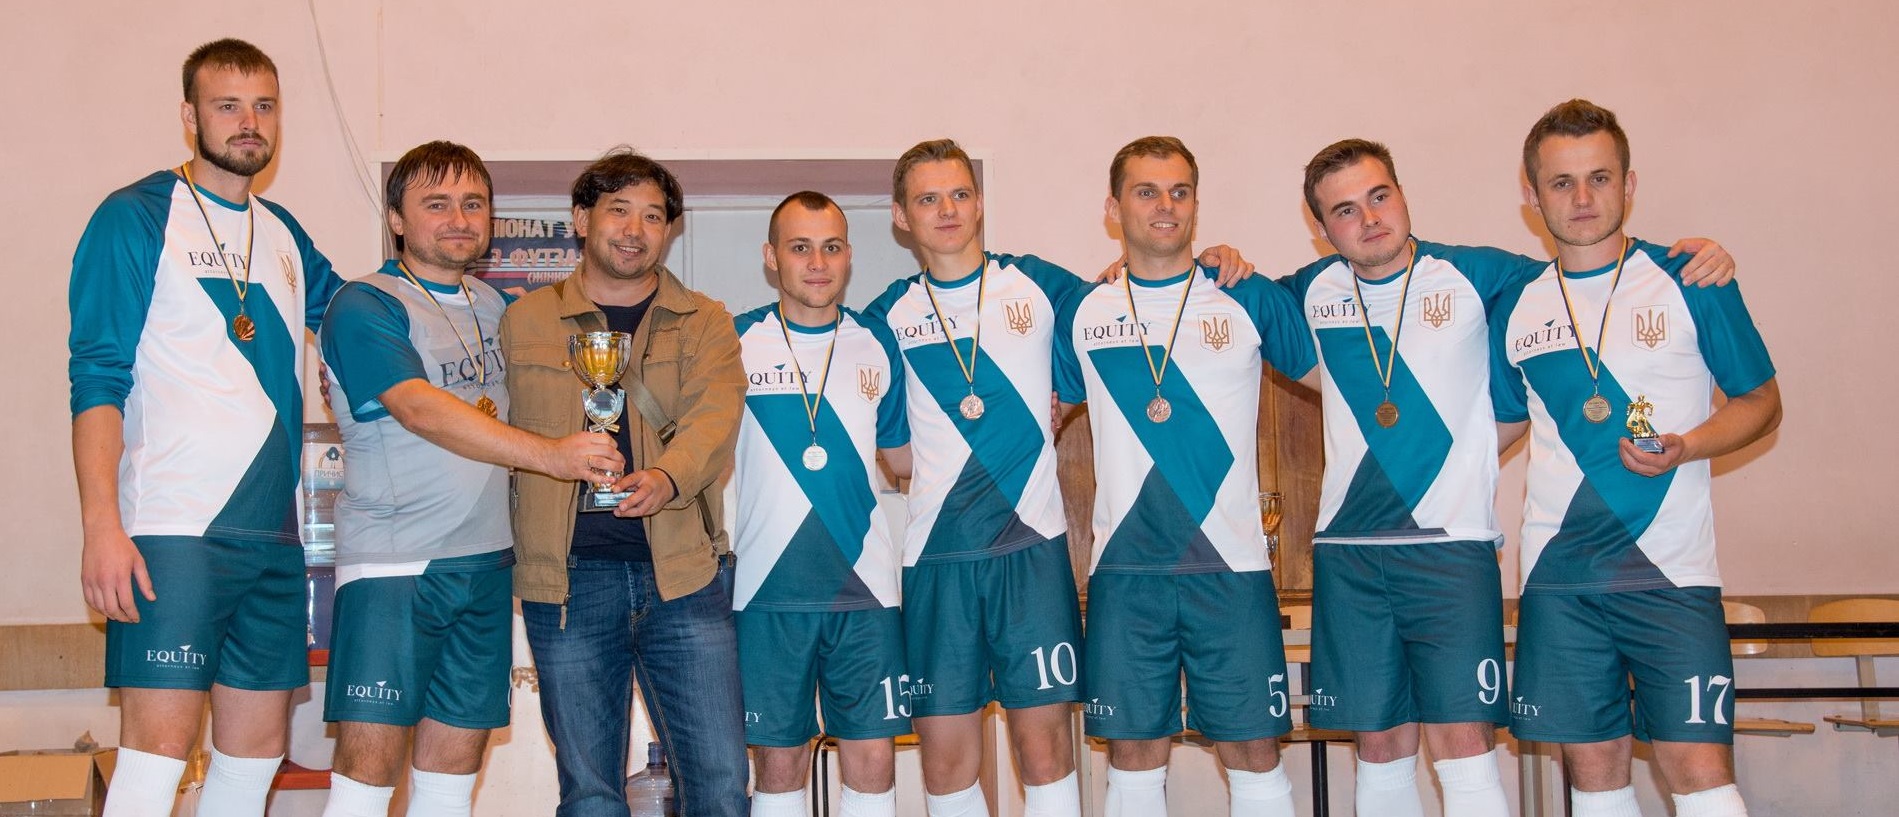 <span class="equity">EQUITY</span> team won the third place in the futsal tournament!